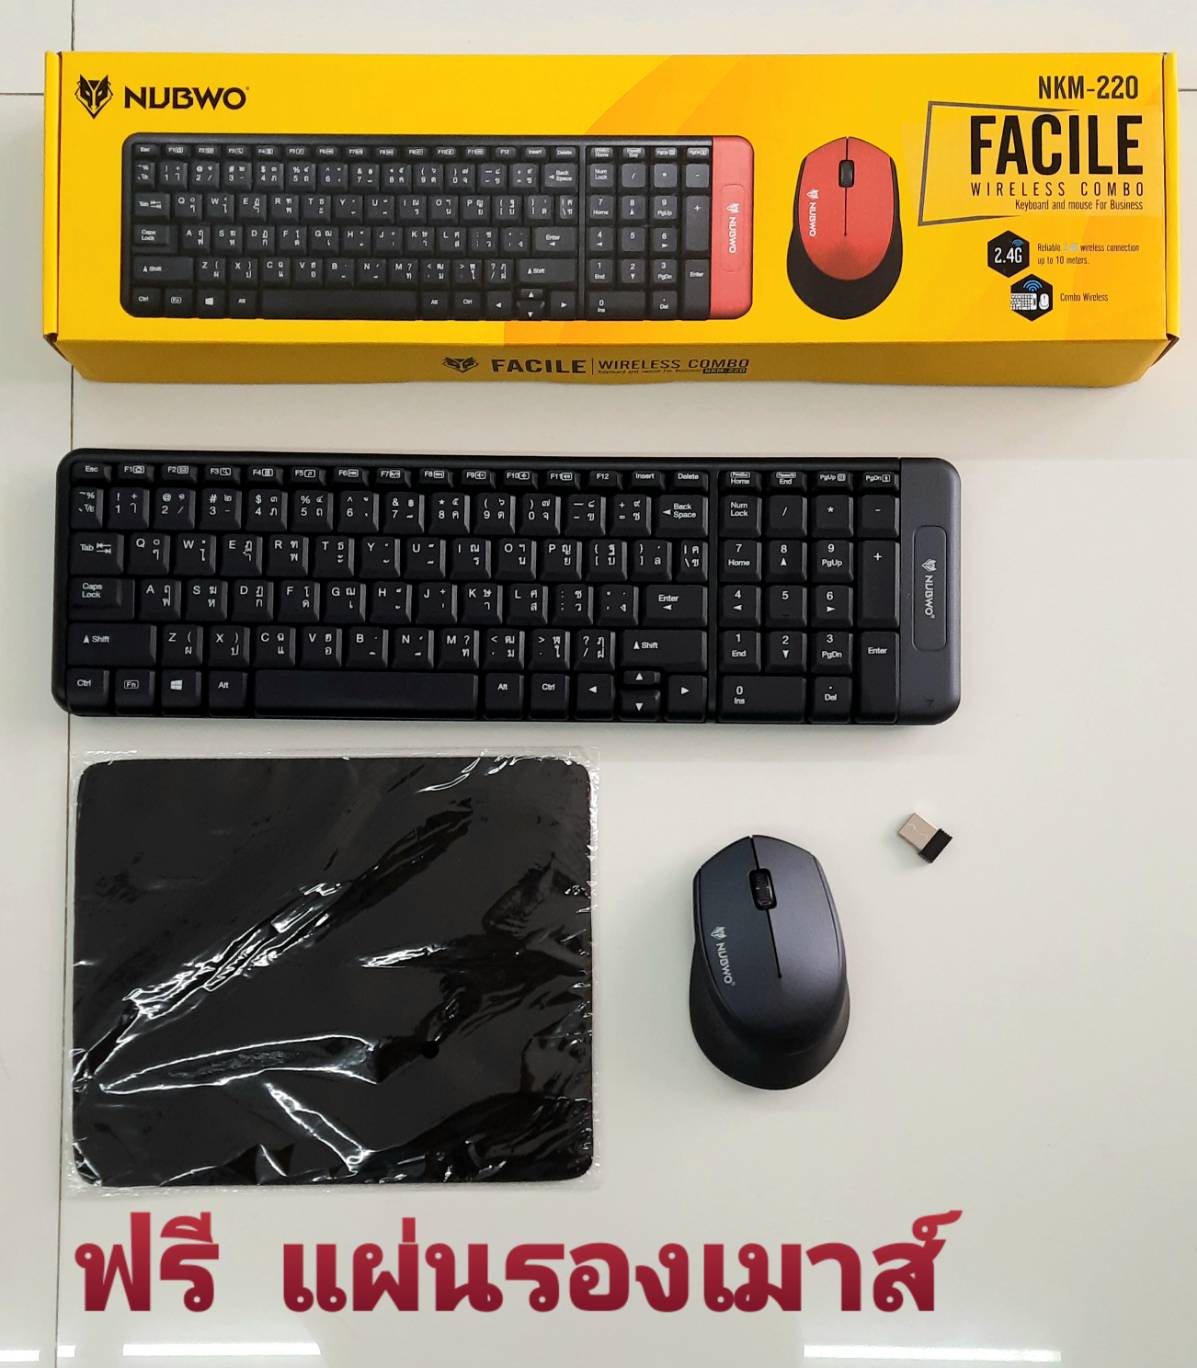 KEYBOARD AND MOUSE WIRELESS NKM-220 NUBWO Reliable 2.4G wireless connection up to 10 meters. Combo Wireless 1200DPI AAAx4 ฟรี แผ่นรองเมาส์